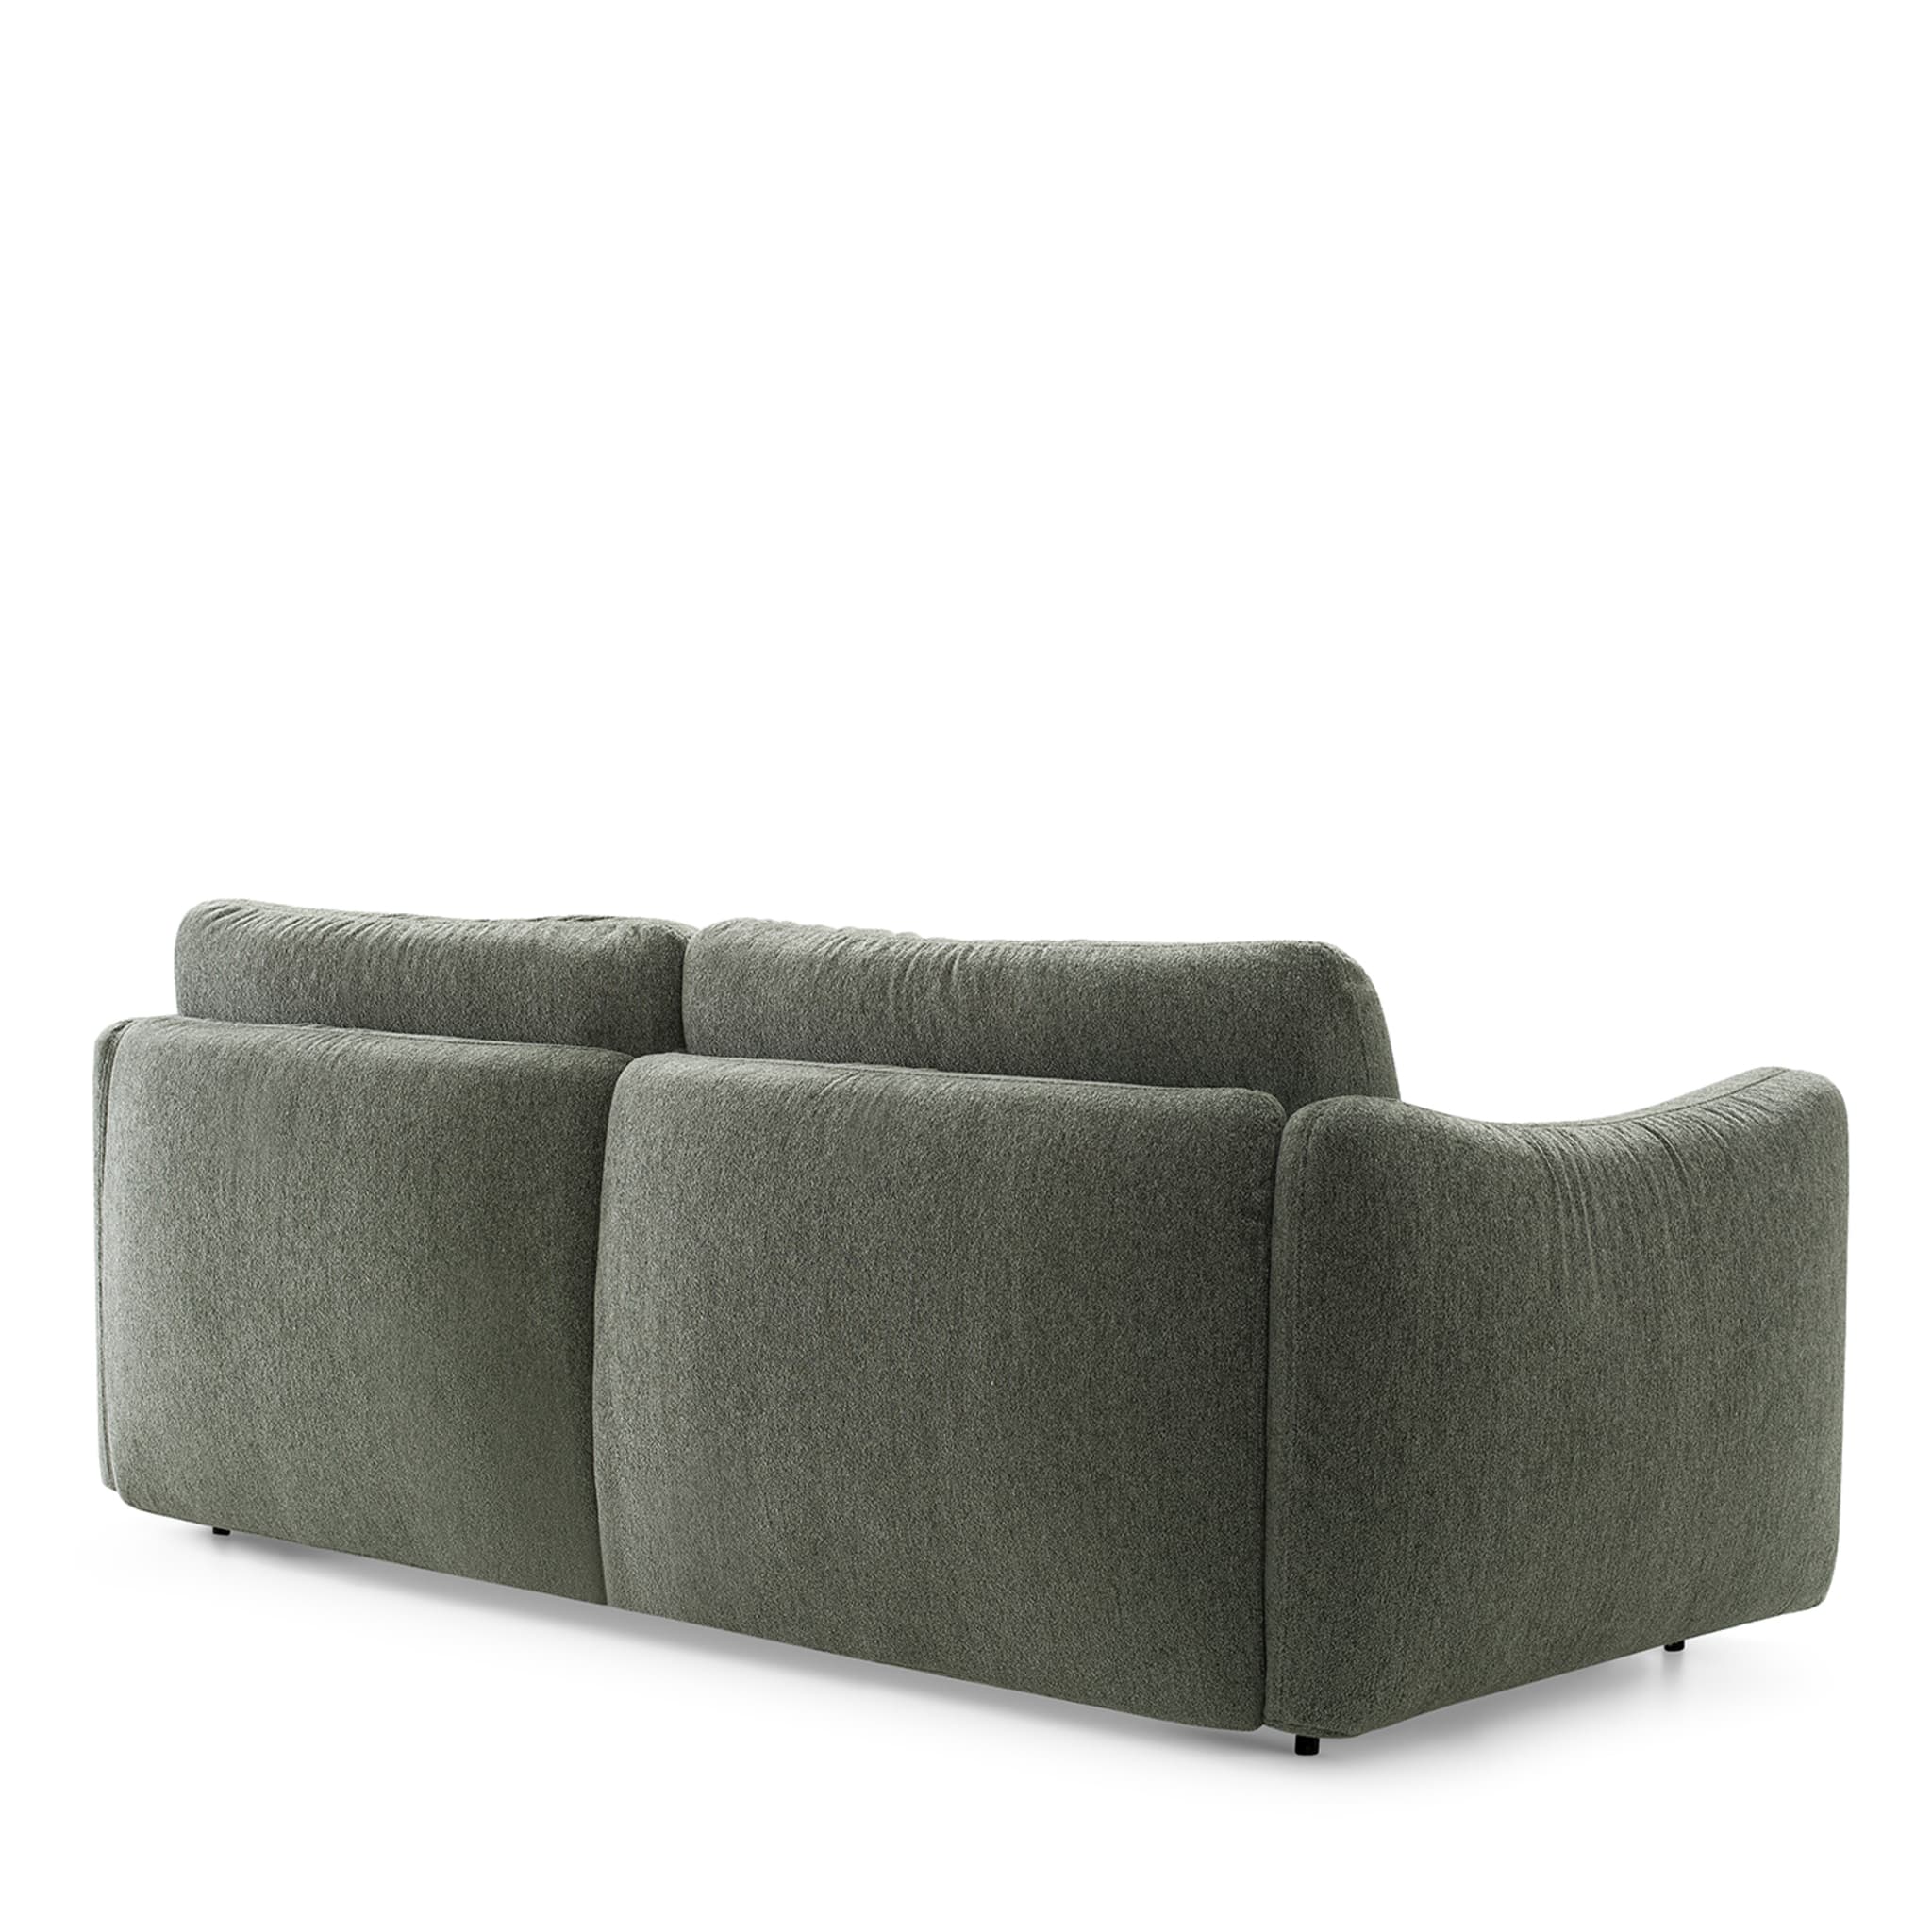 Olivier Green Sofa Bed - Alternative view 2